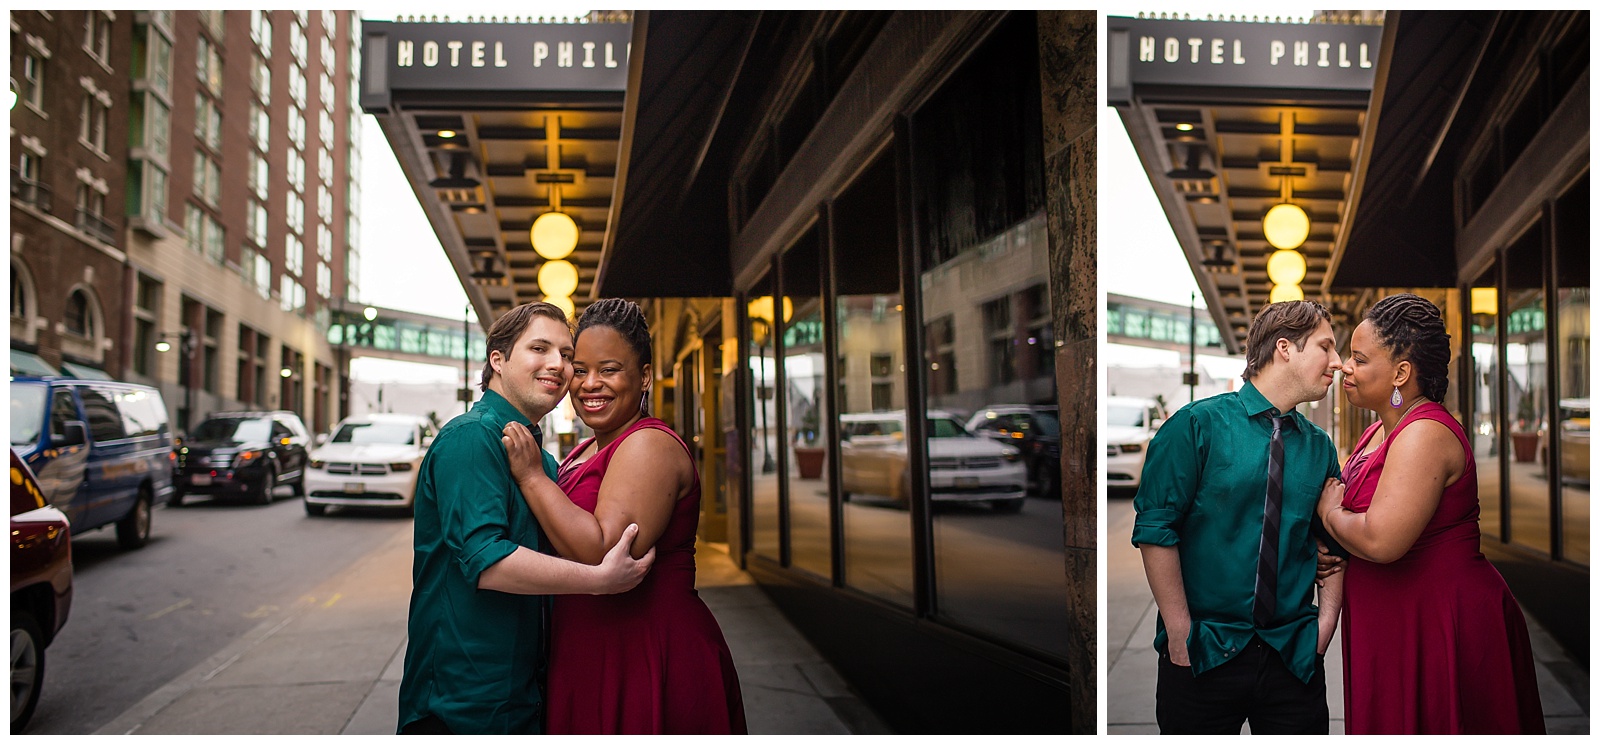 Engagement photography in Kansas City's Power & Light District.